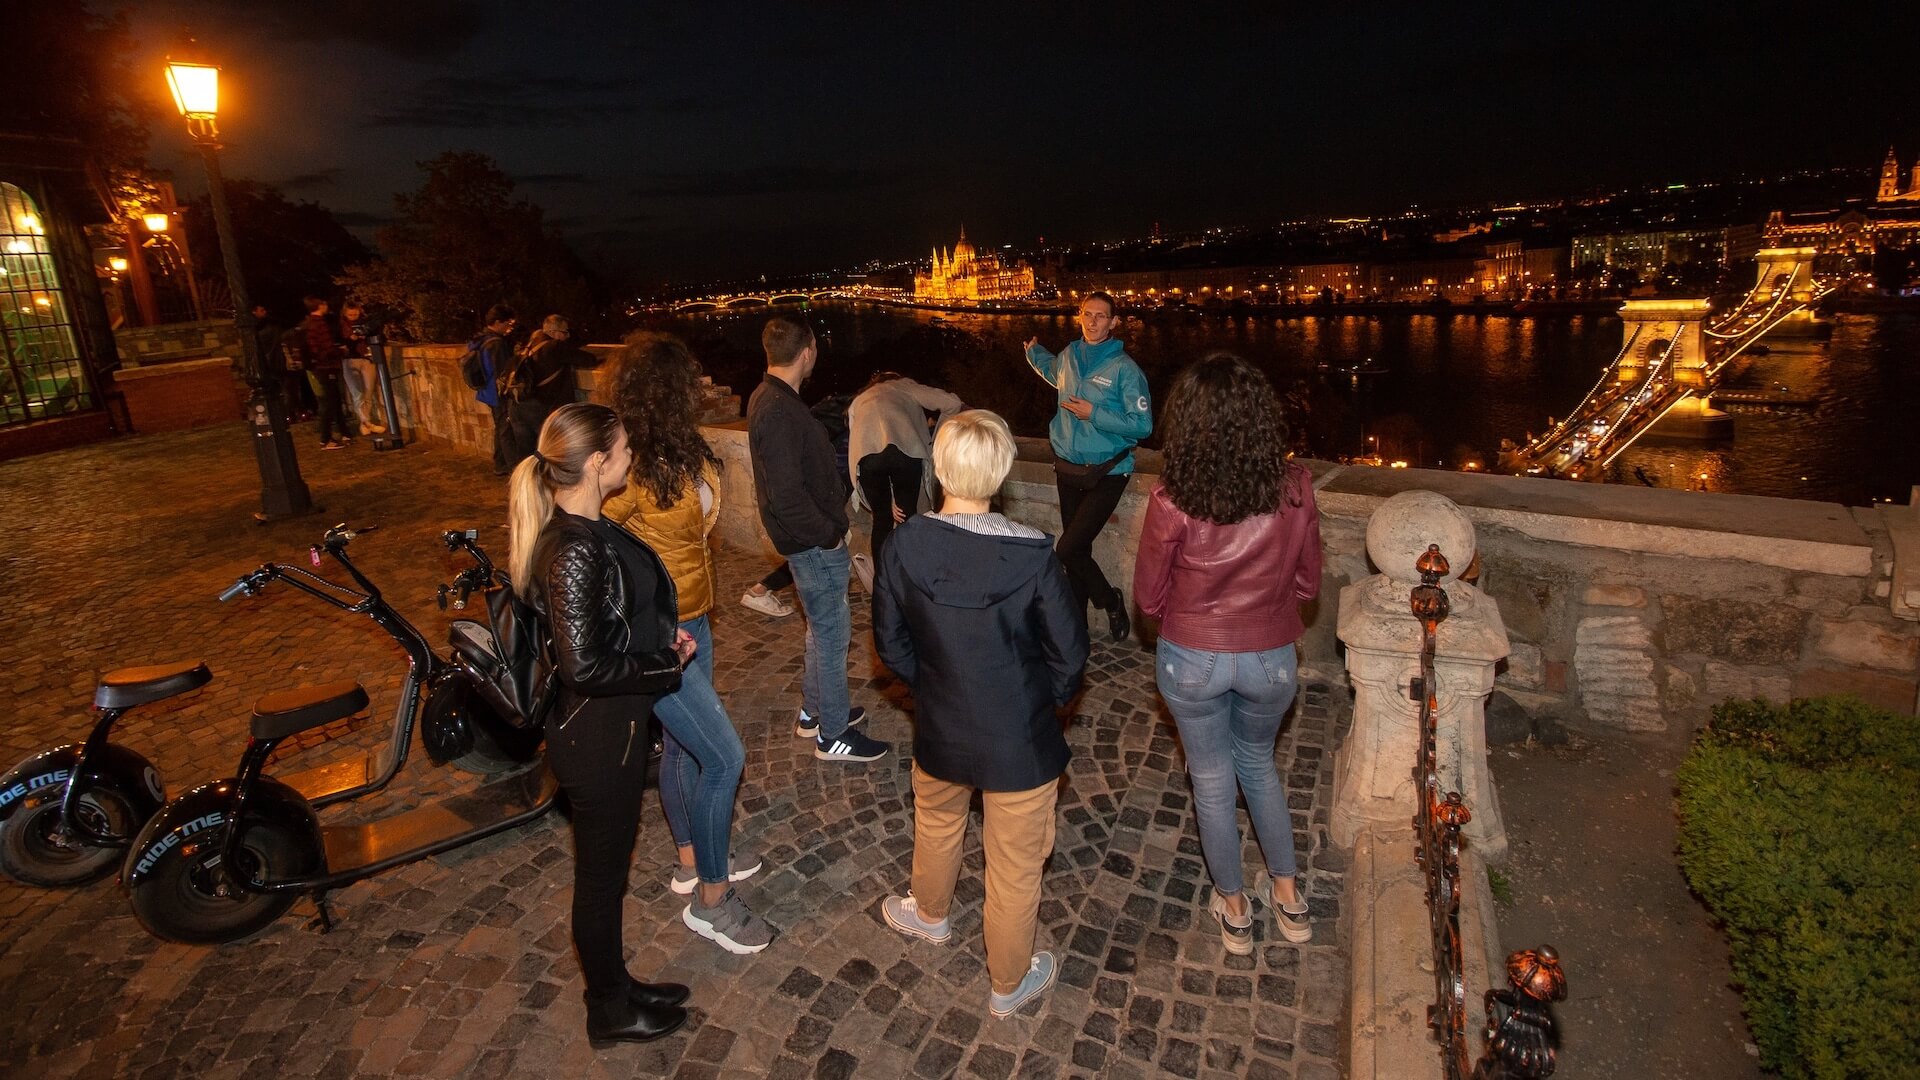 The Night Tour offer breathtaking views of Budapest